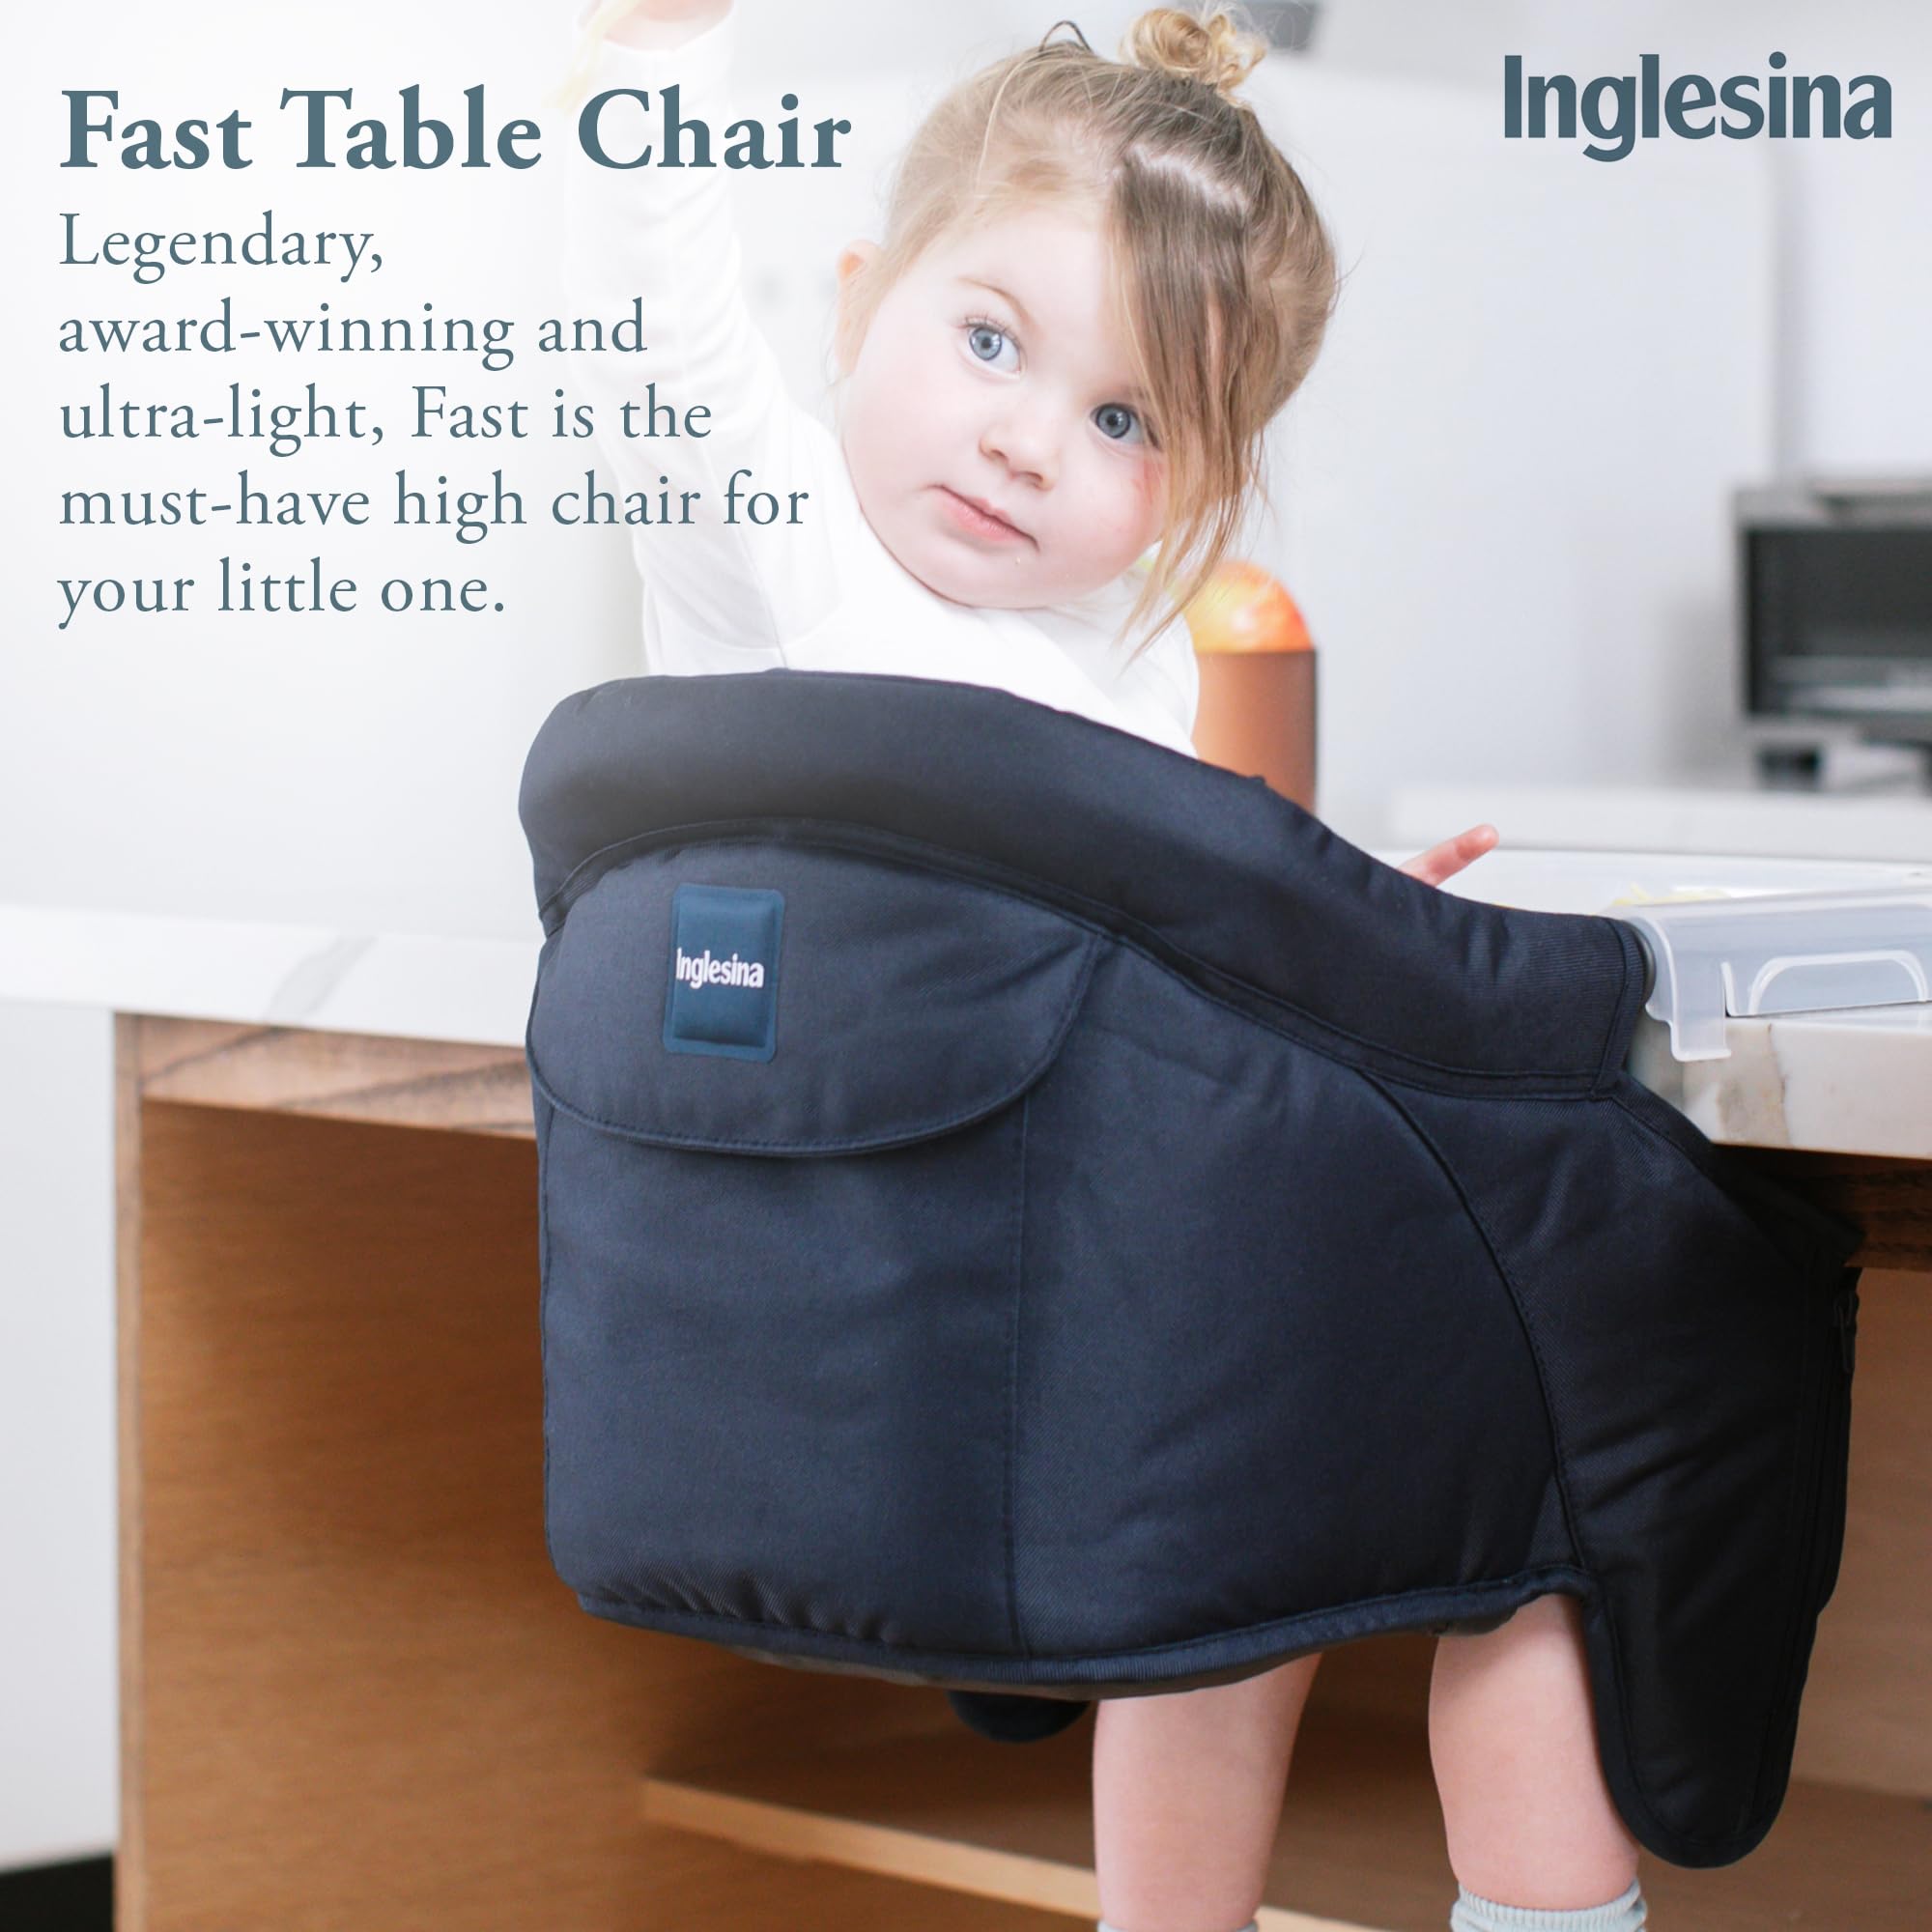 Inglesina Fast Table Chair - Award-Winning Baby High Chair for Eating & Dining - Compact, Portable & Foldable - Leaves No Scratches - for Babies 6-36 Months & 1-3 Year Old Toddler - Navy